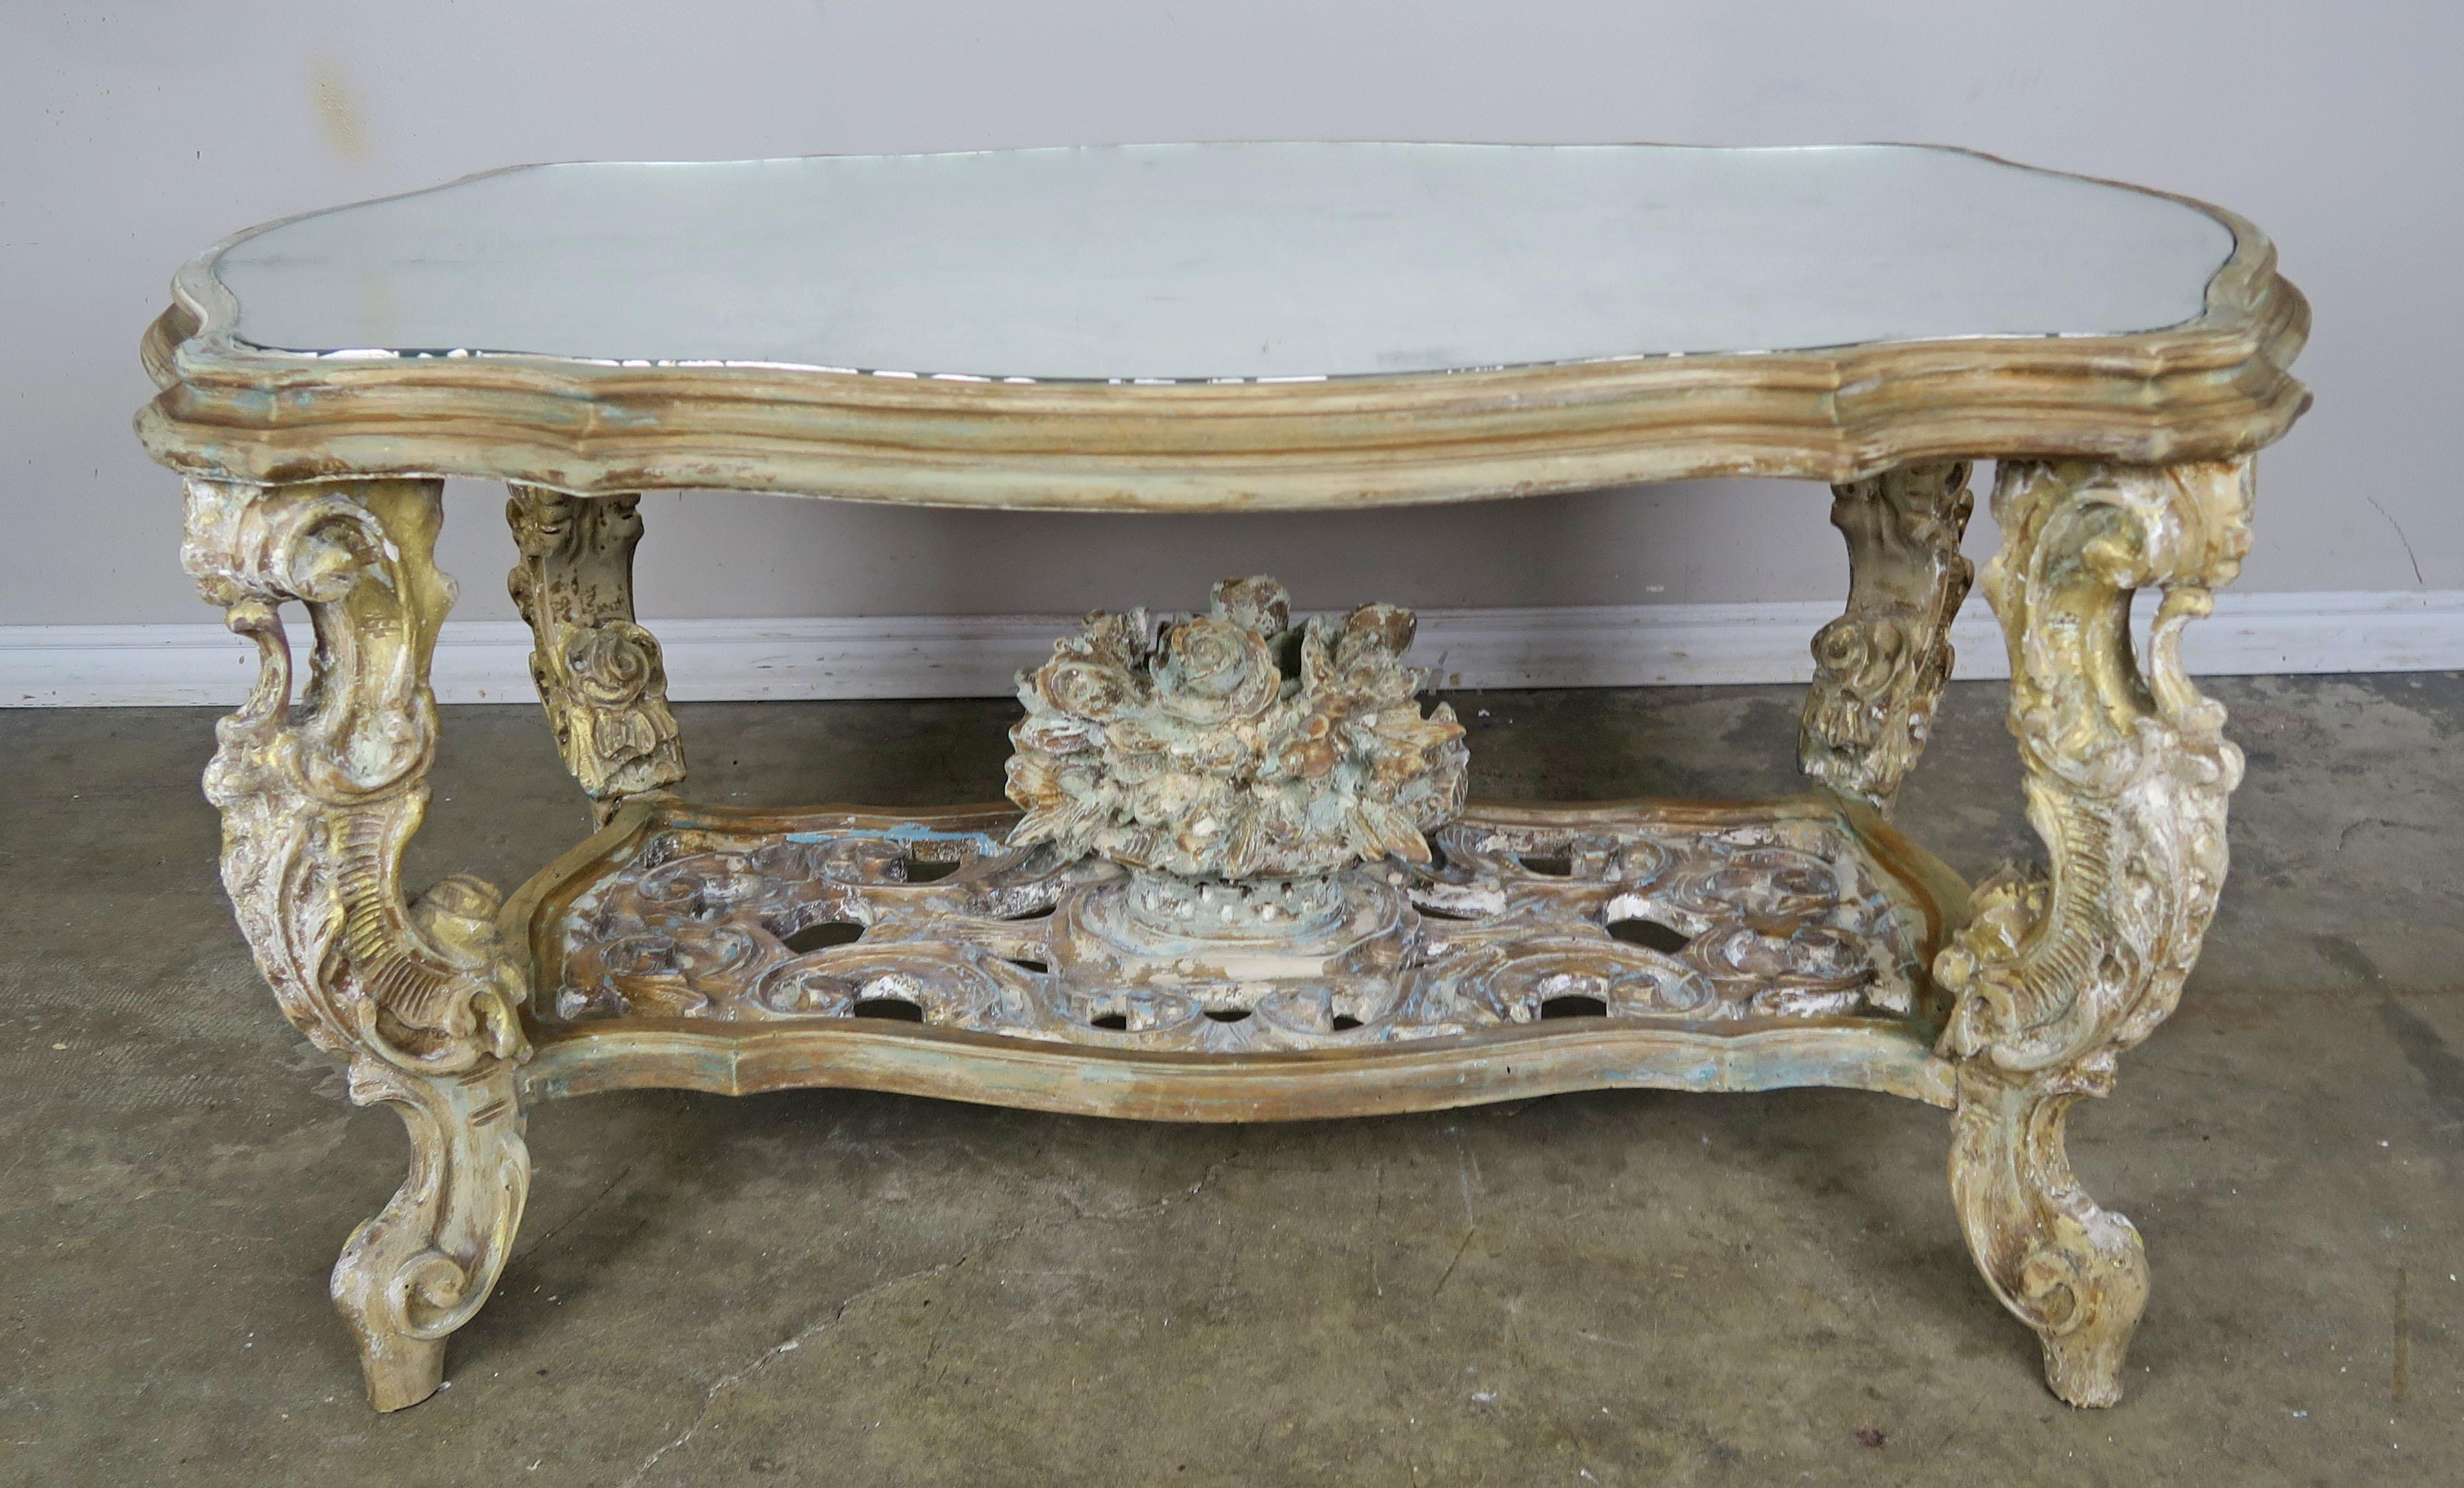 Hand-Carved Carved French Rococo Style Tea Table with Silvered Mirror Top, circa 1930s